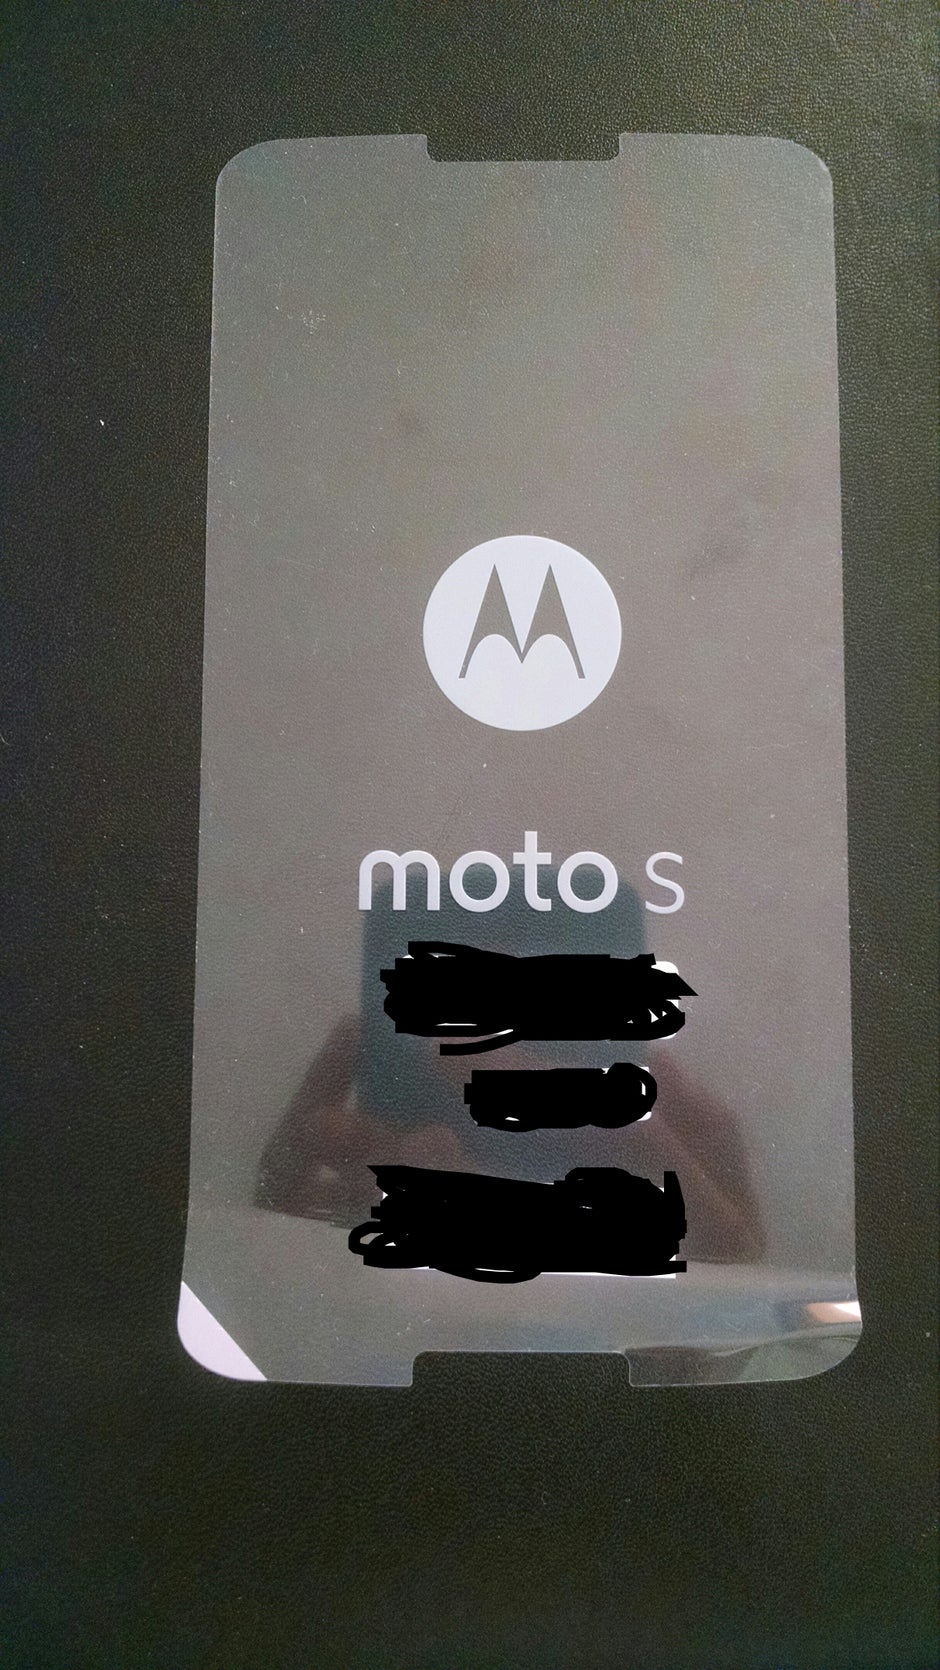 Moto S (Shamu) may not be a Nexus, but an Android Silver device for Verizon